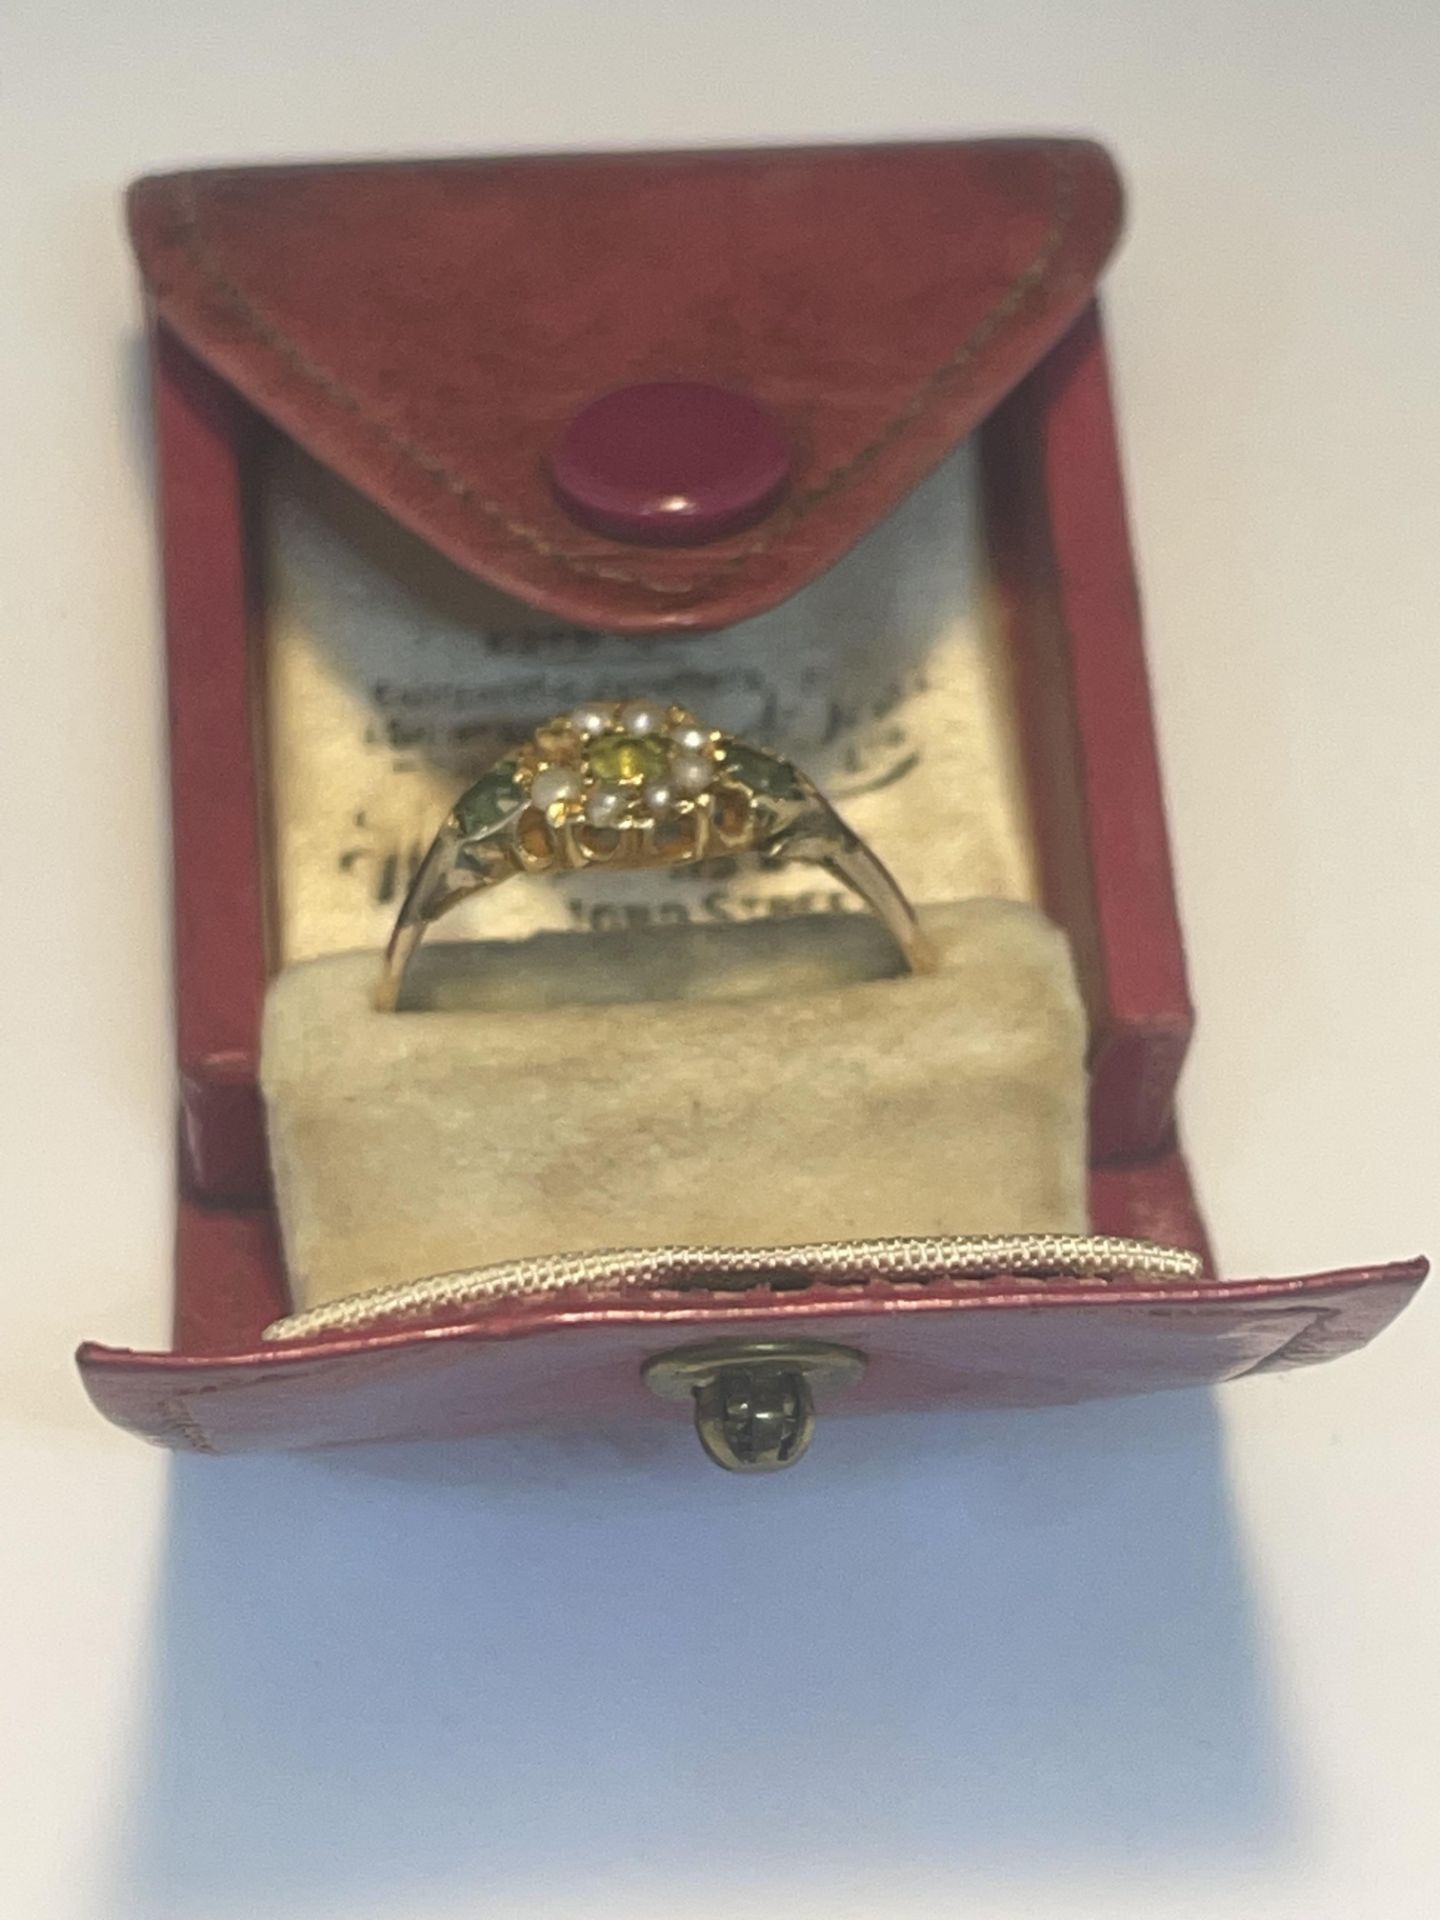 A 15 CARAT ANTIQUE GOLD RING WITH EMERALDS, PEARLS (ONE MISSING) AND PERIDOT GROSS WEIGHT 2.1 - Image 3 of 3